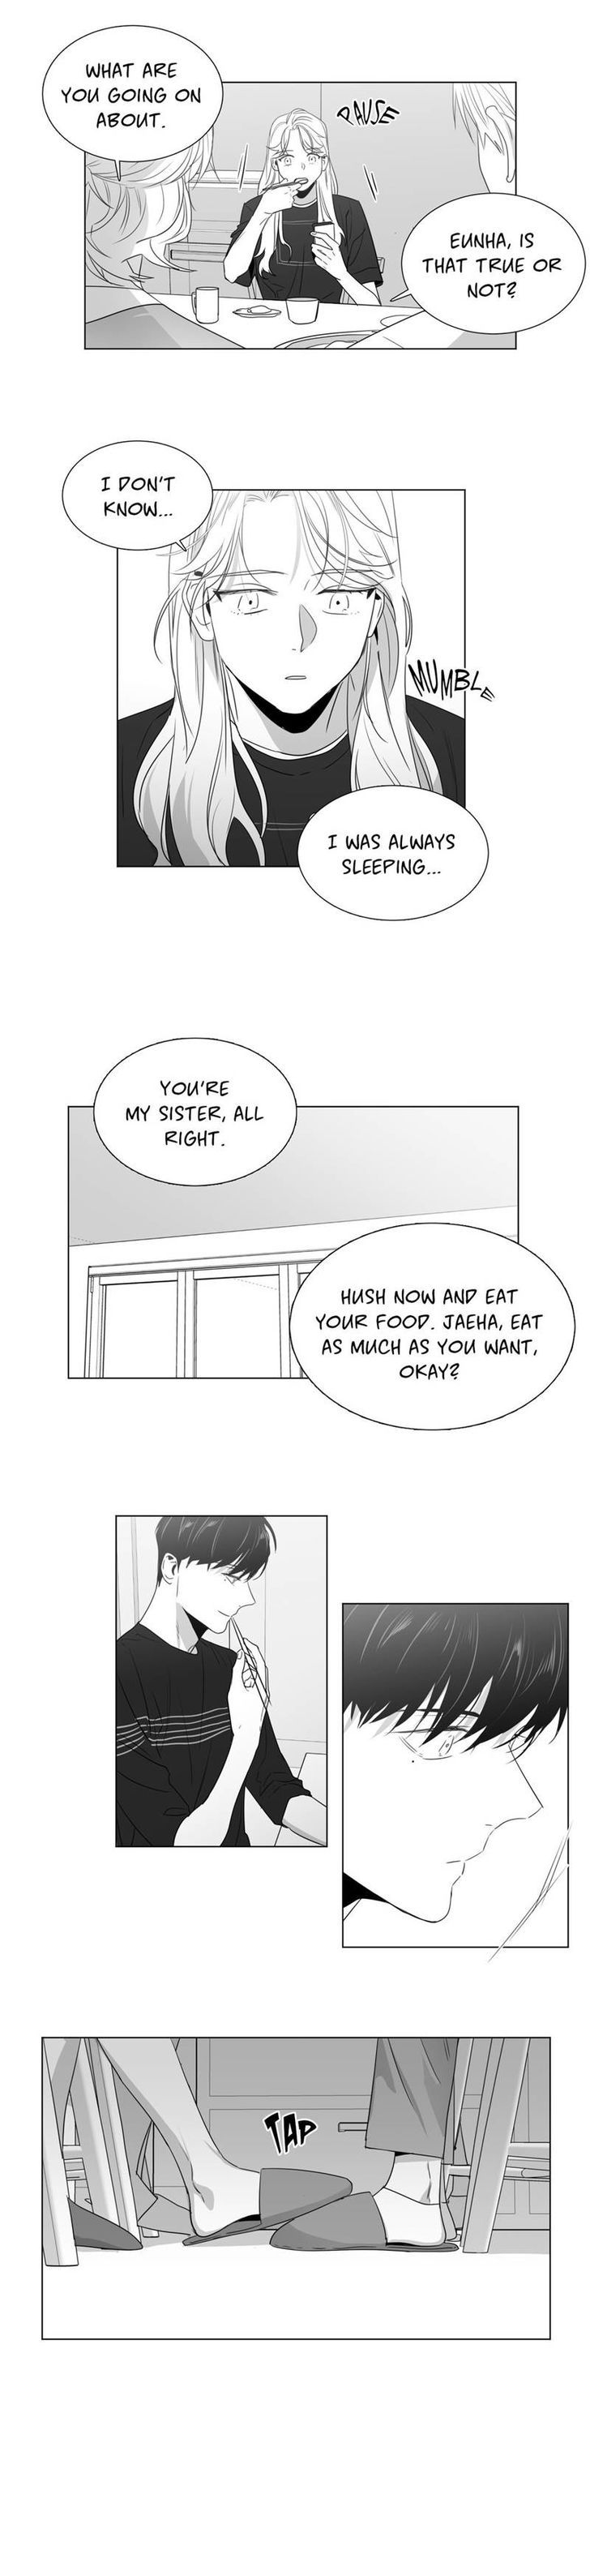 Lover Boy (Lezhin) Chapter 041 page 10